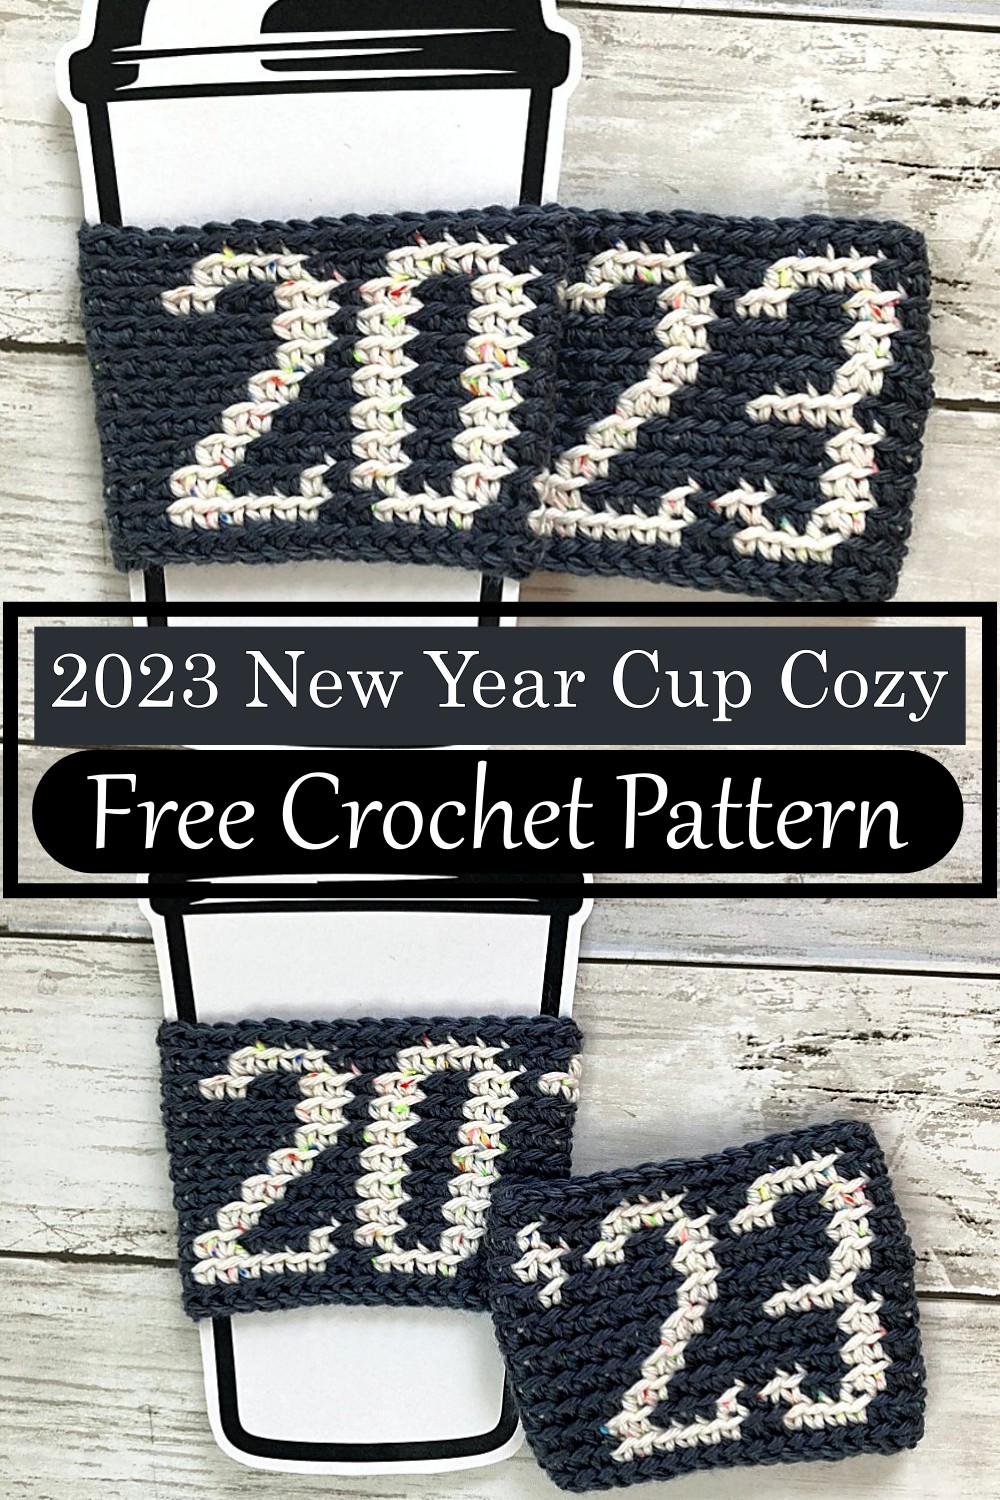 2023 New Year Cup Cozy